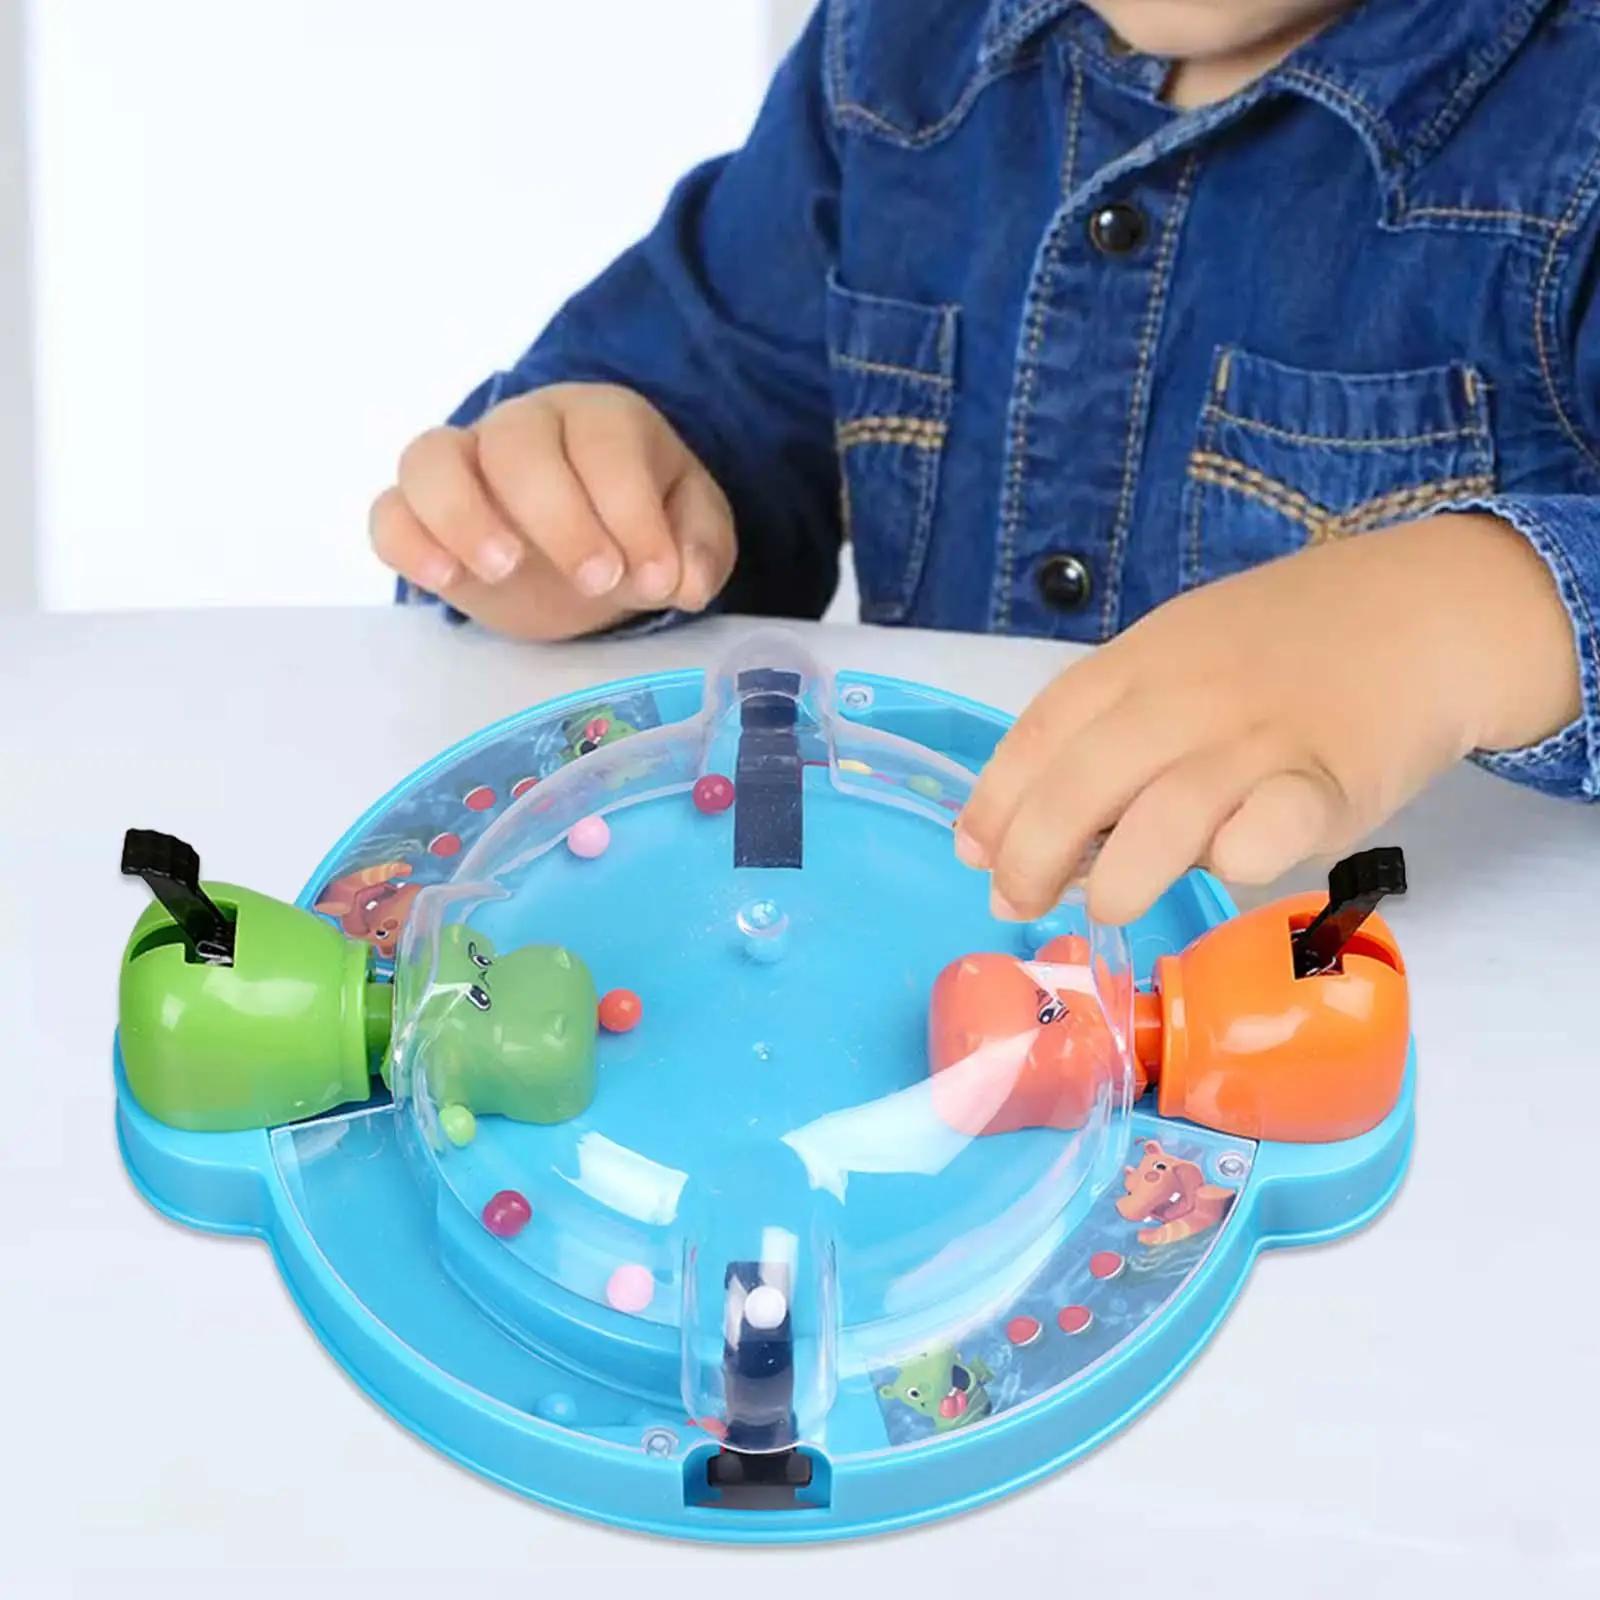 speeds race Toy Fine Motor Skills strategy Hungry Hippo Bead Contest for Birthday gifts Home Preschool